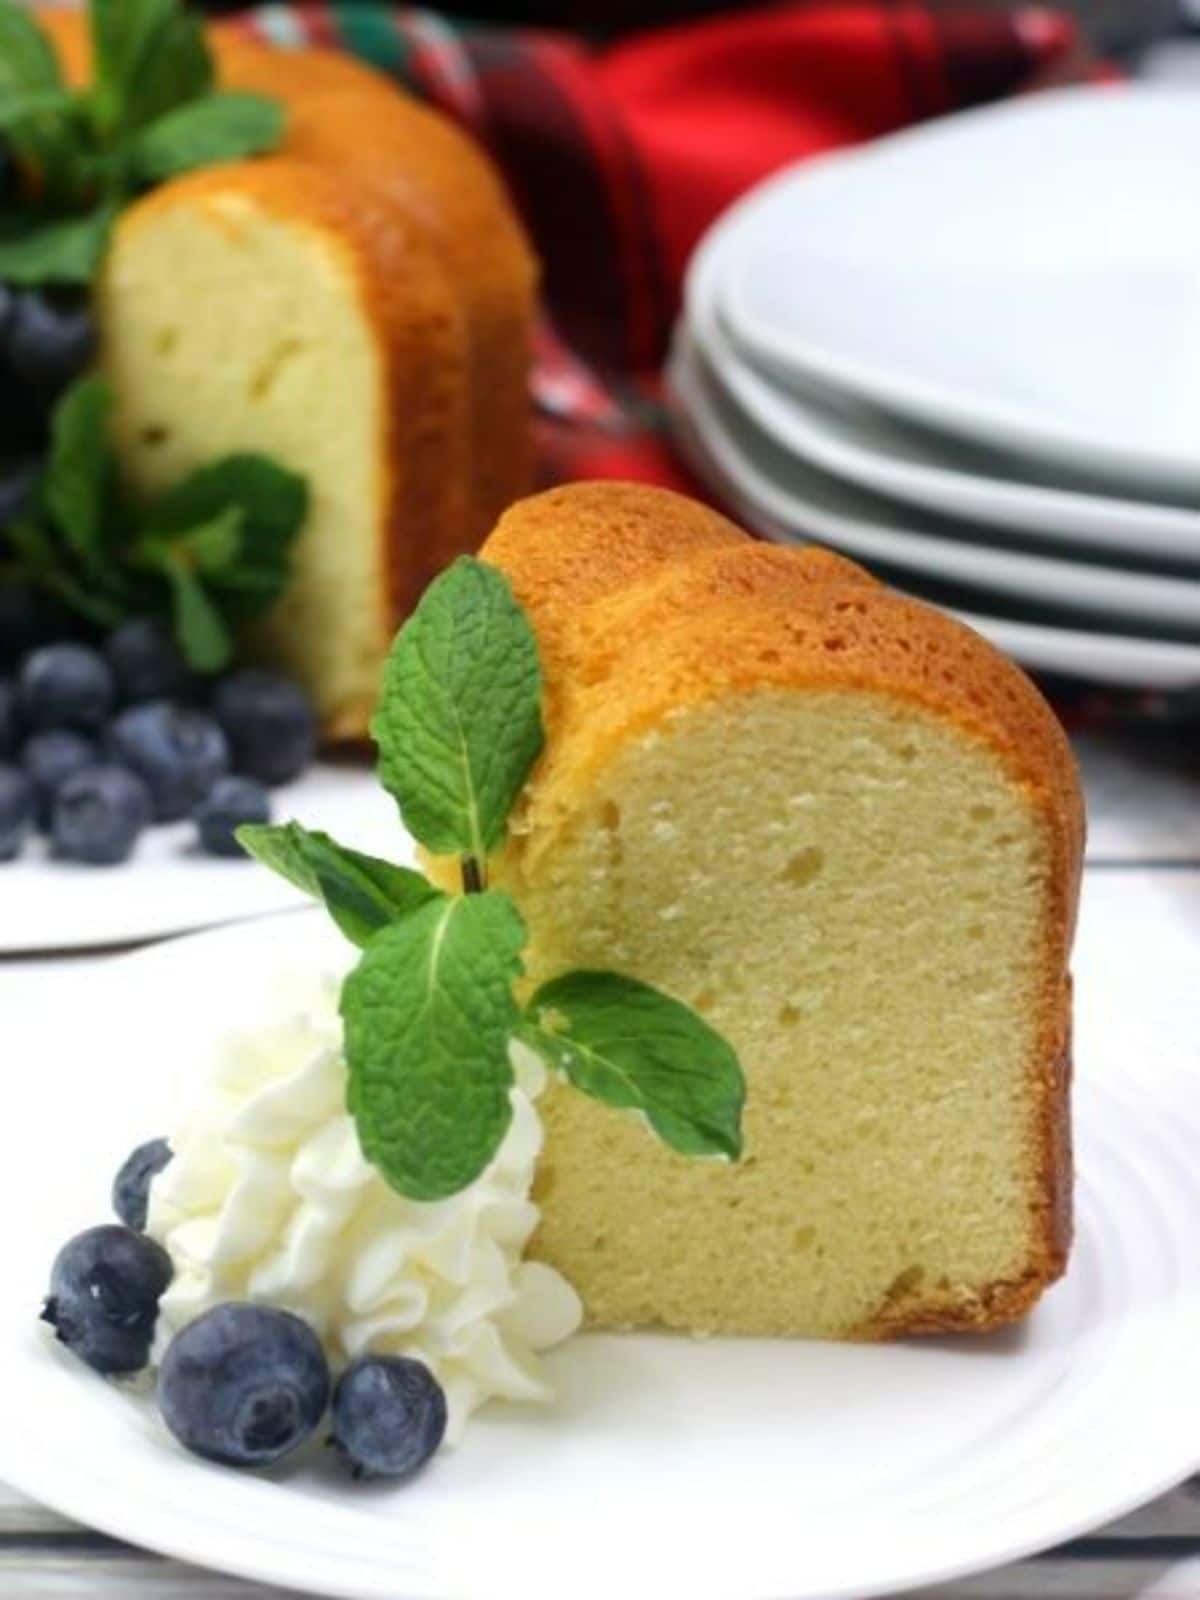 a slice of instant pot pound cake with whipped cream, a mint leaf, and blueberries on a white plate with the rest of the cake, more blueberries and a stack of white plates blurred in the background